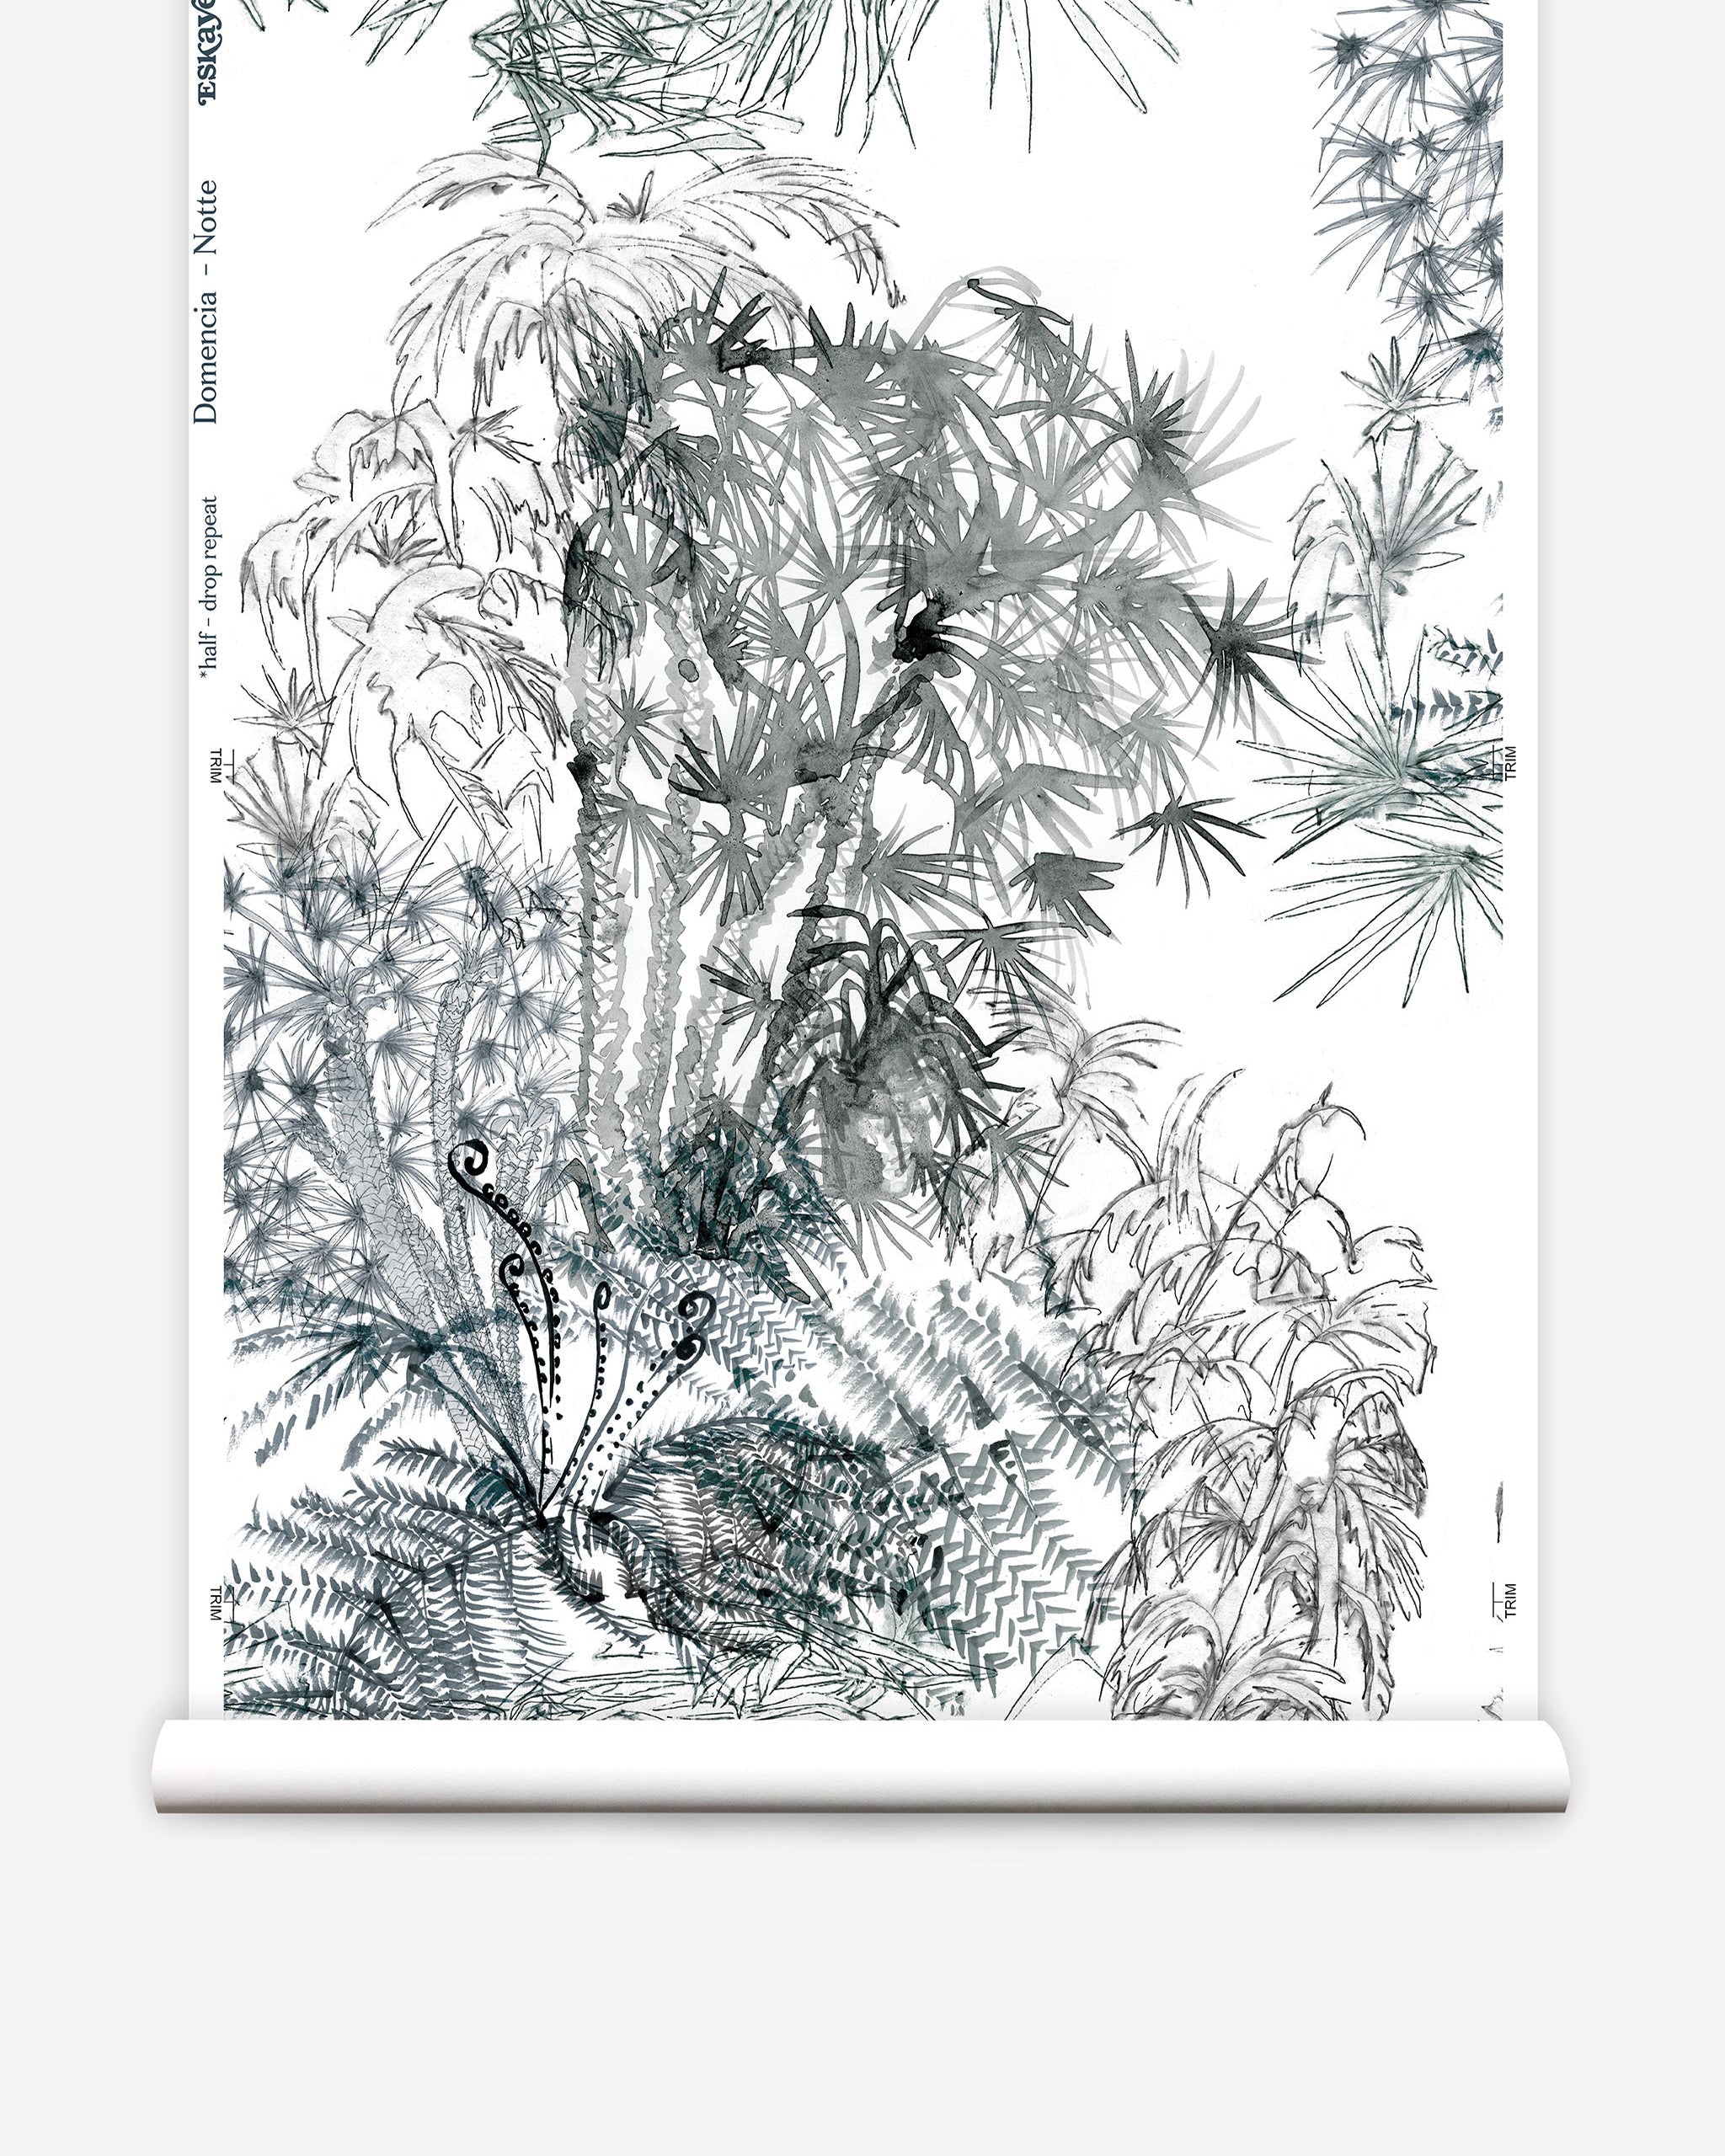 Partially unrolled wallpaper yardage in a painterly palm tree print in gray on a cream field.